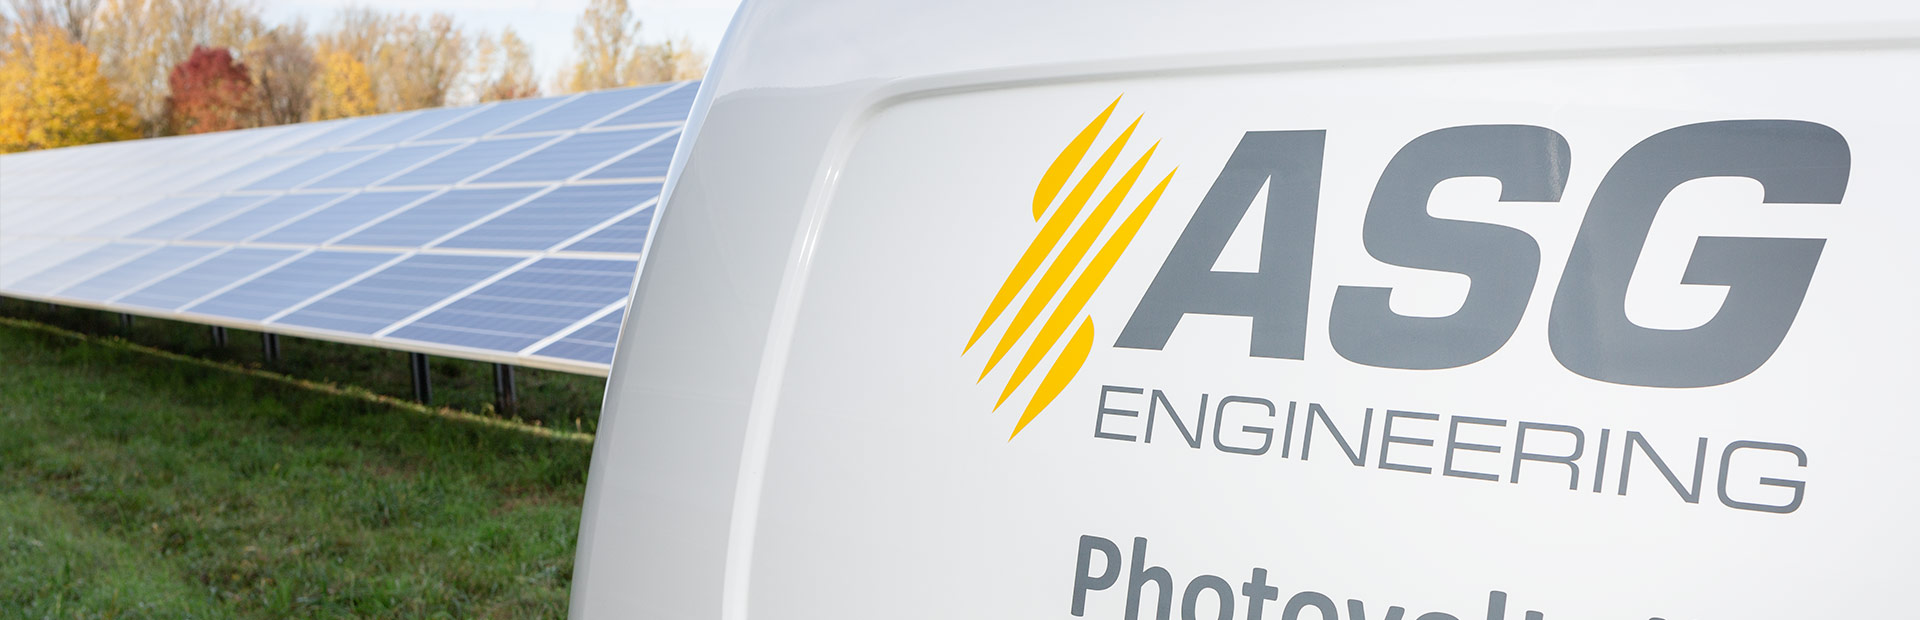 ASG Engineering Photovoltaik